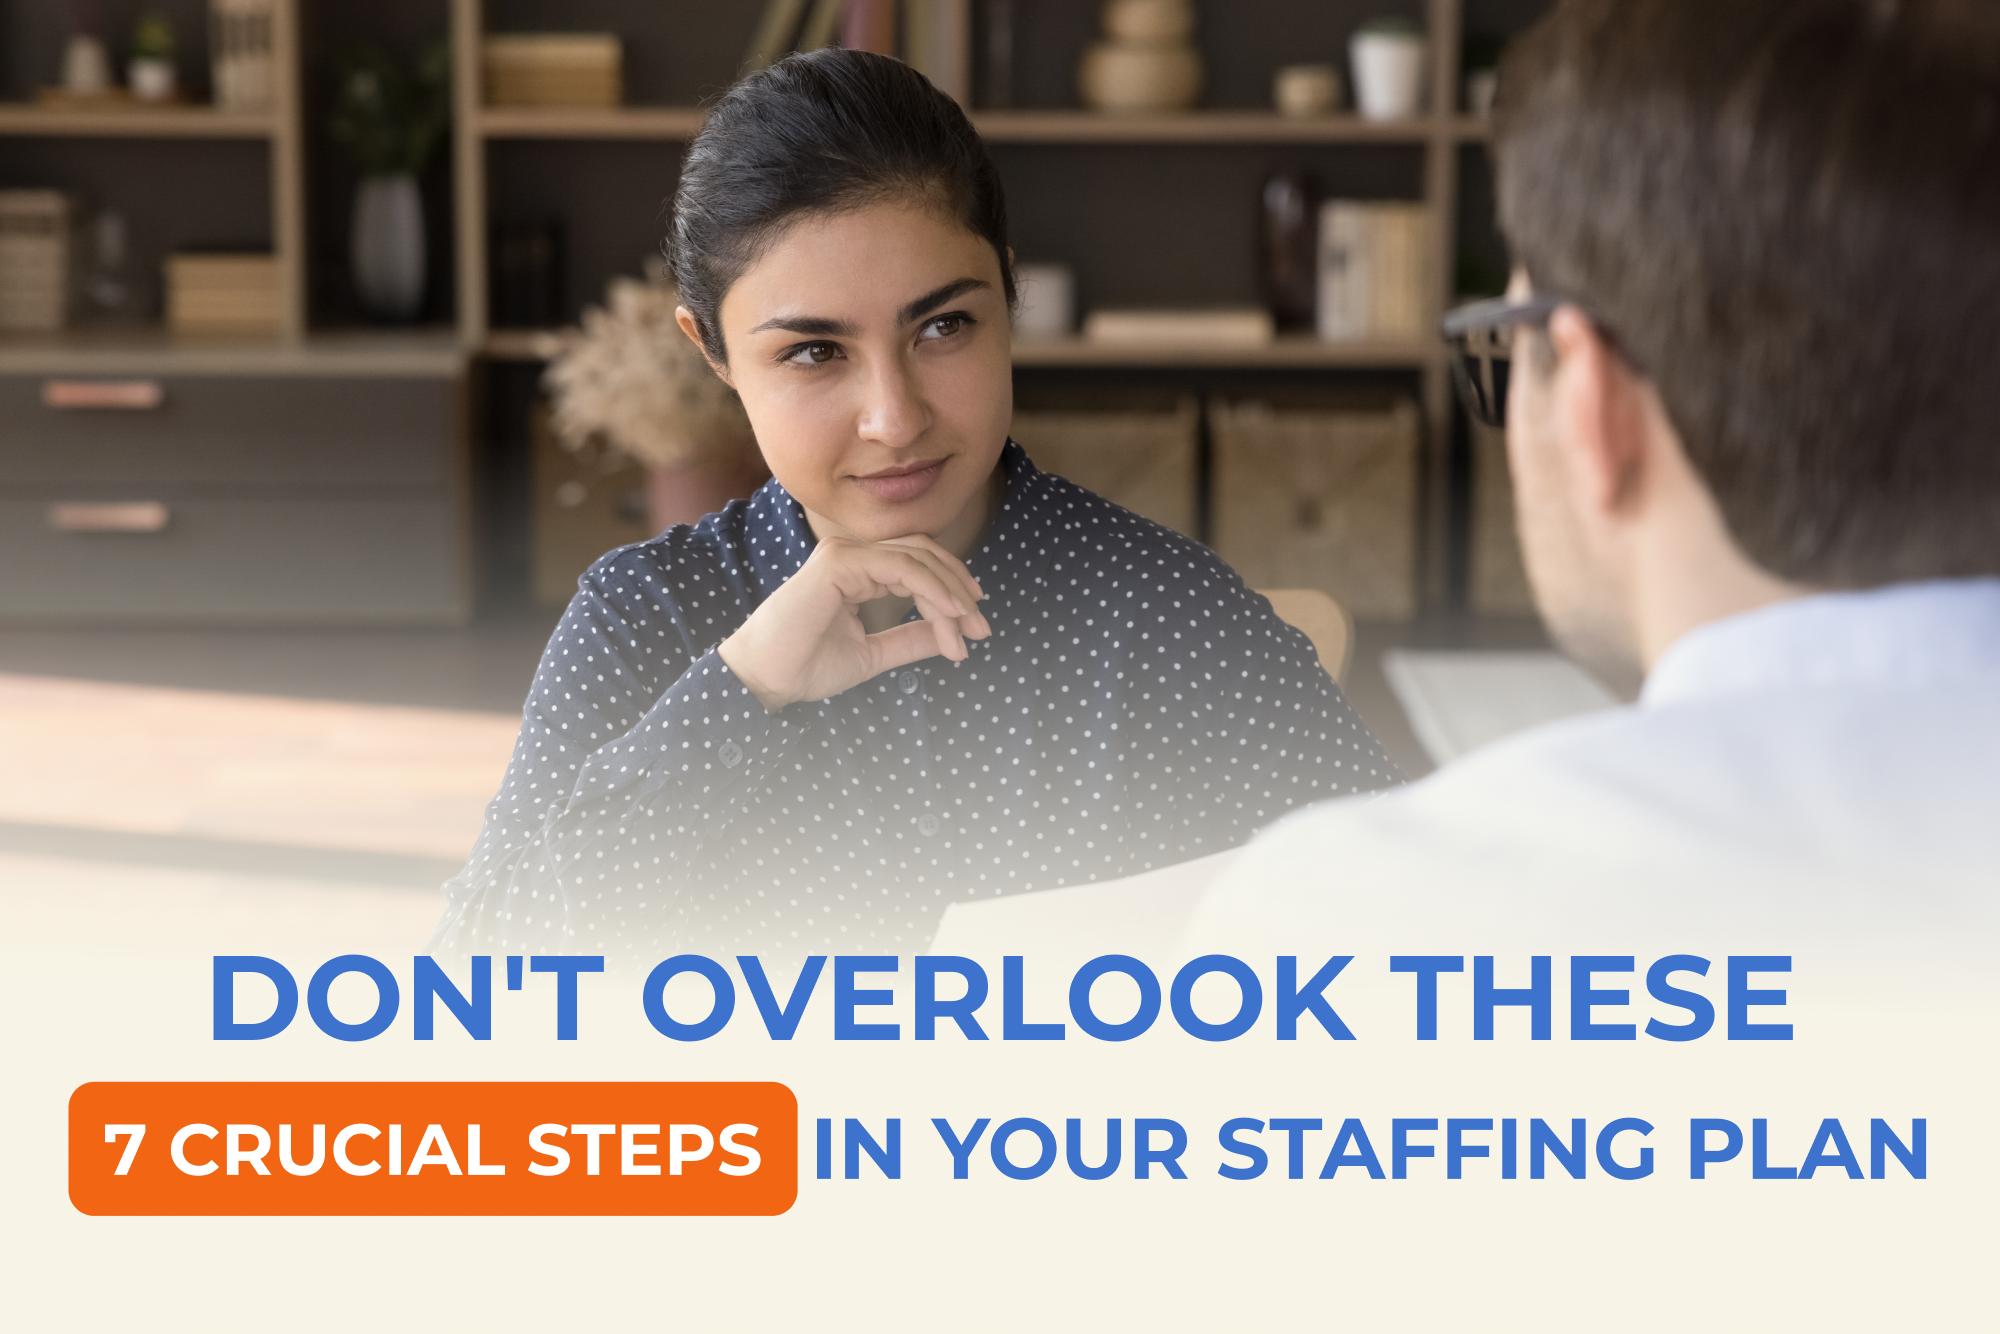 Don't Overlook These 7 Crucial Steps in Your Staffing Plan